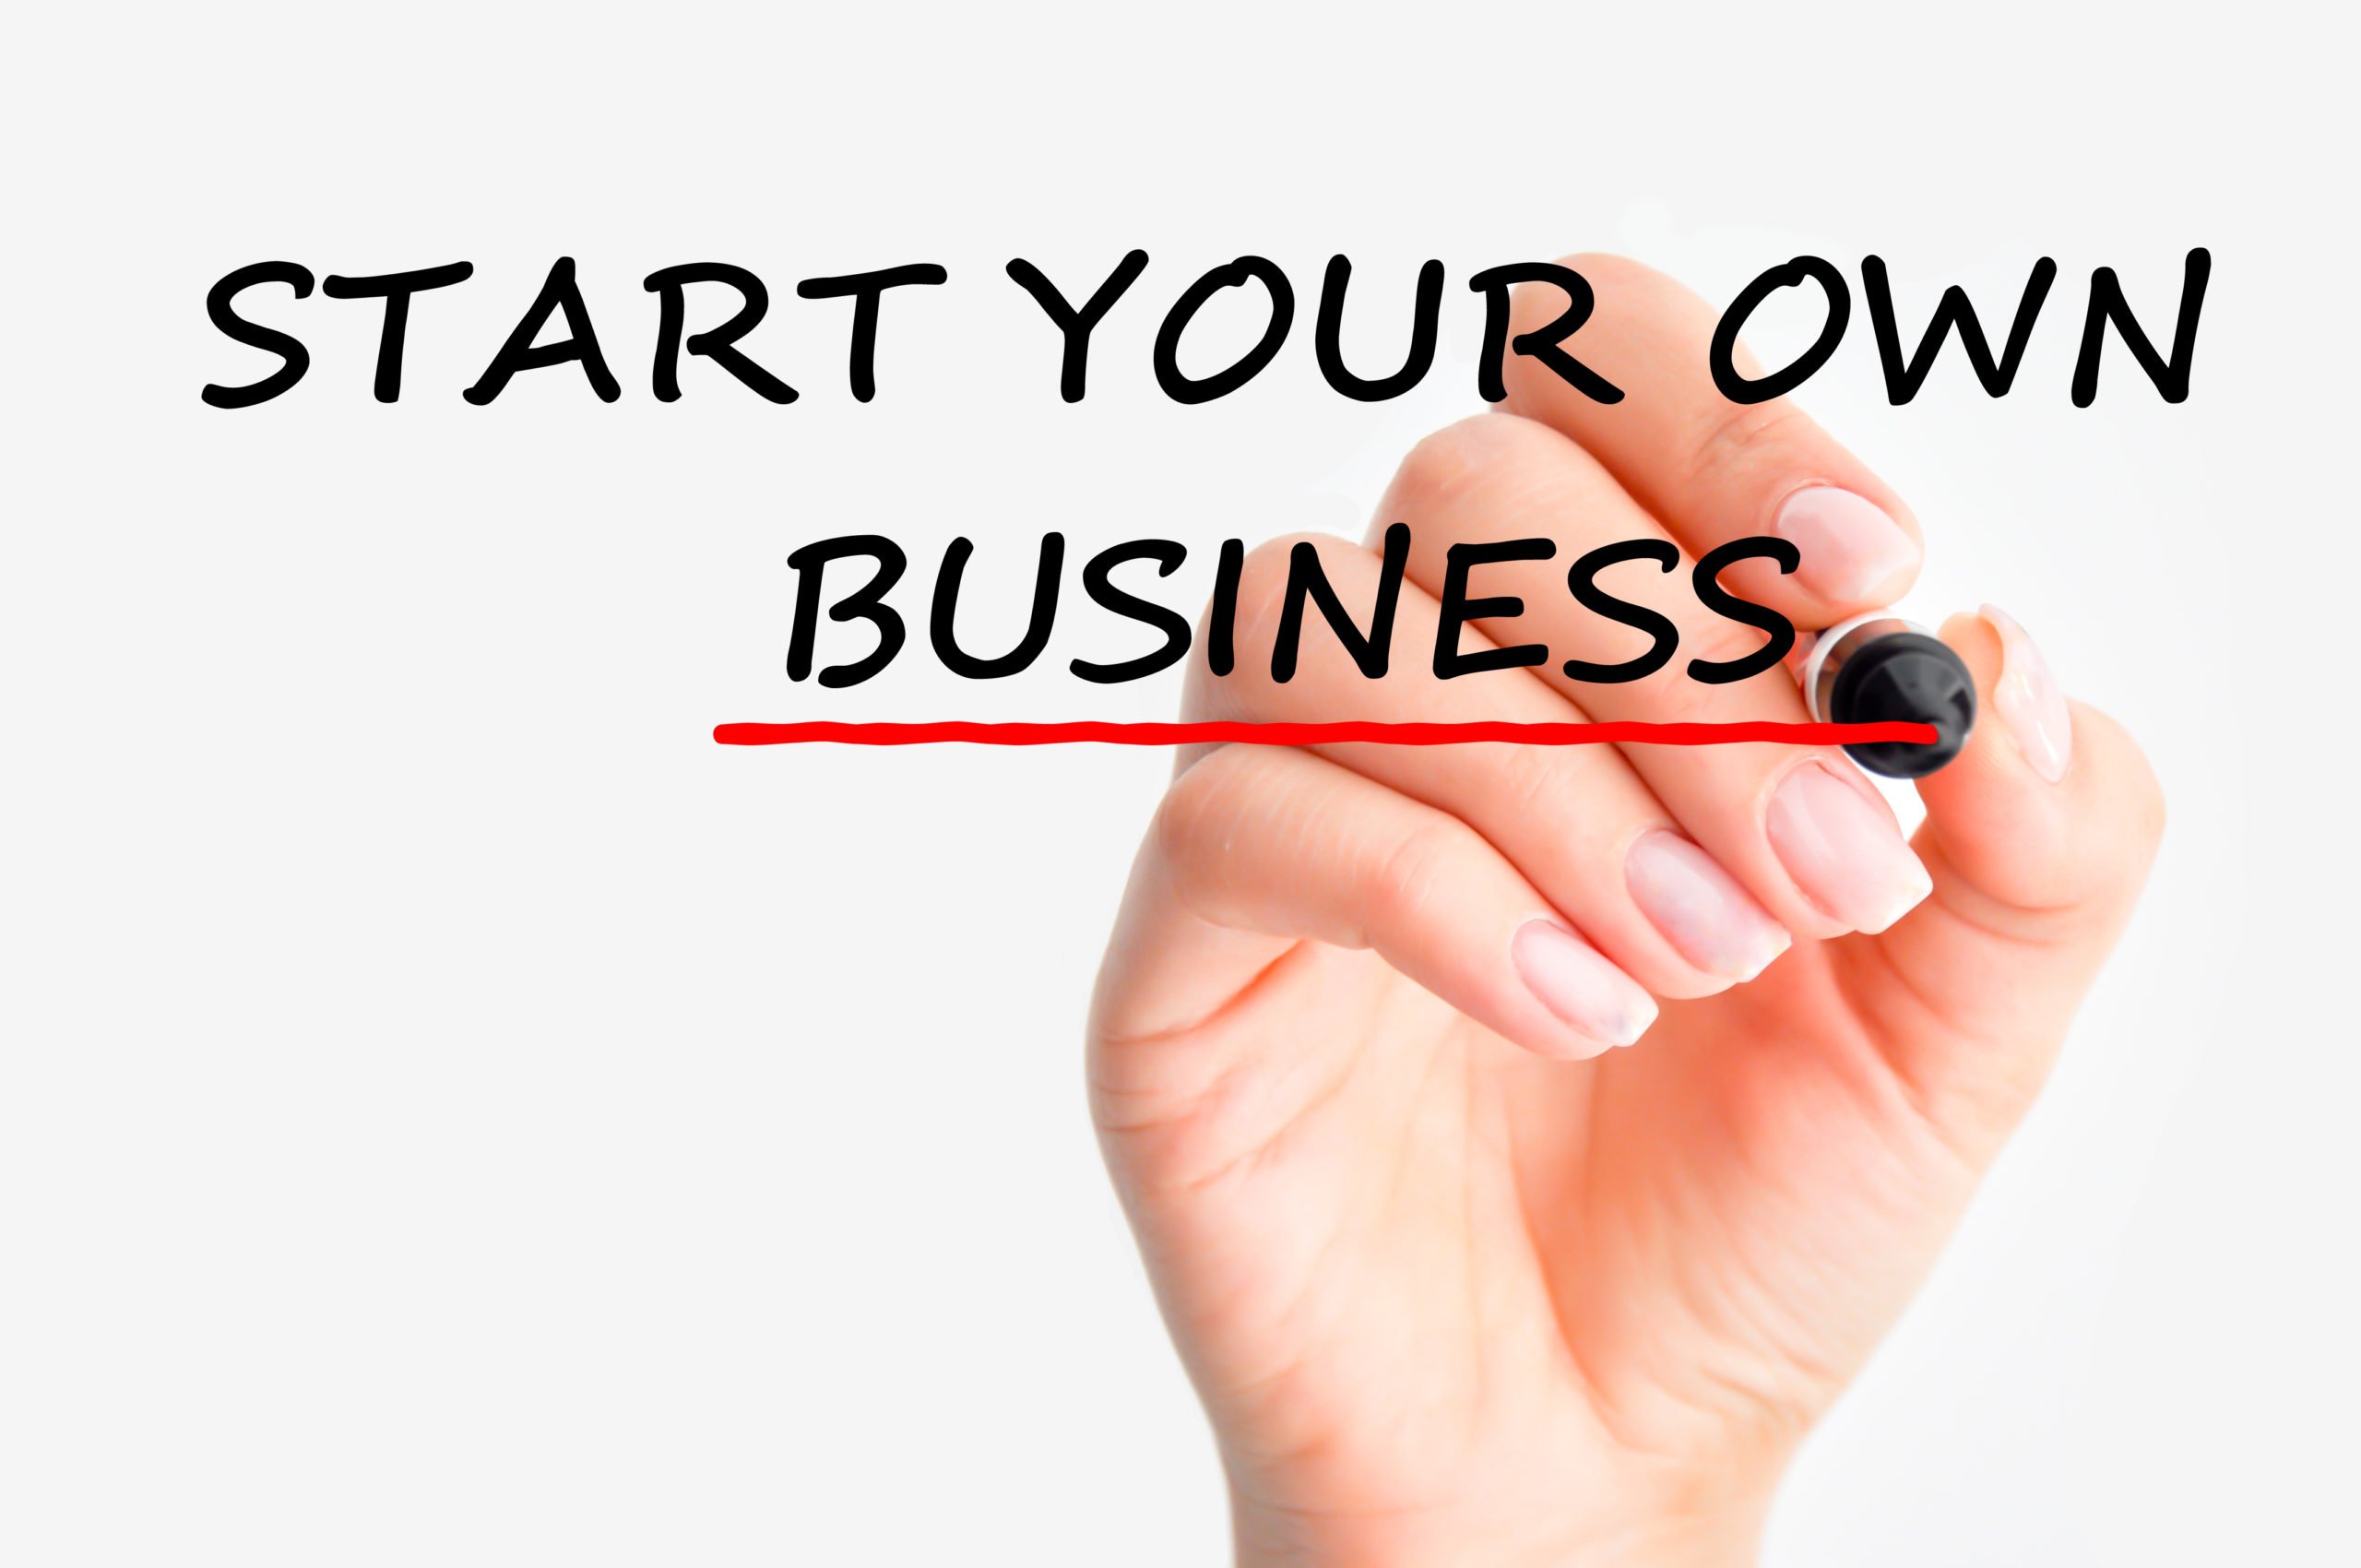 What are the advantages of owning your own independent business?